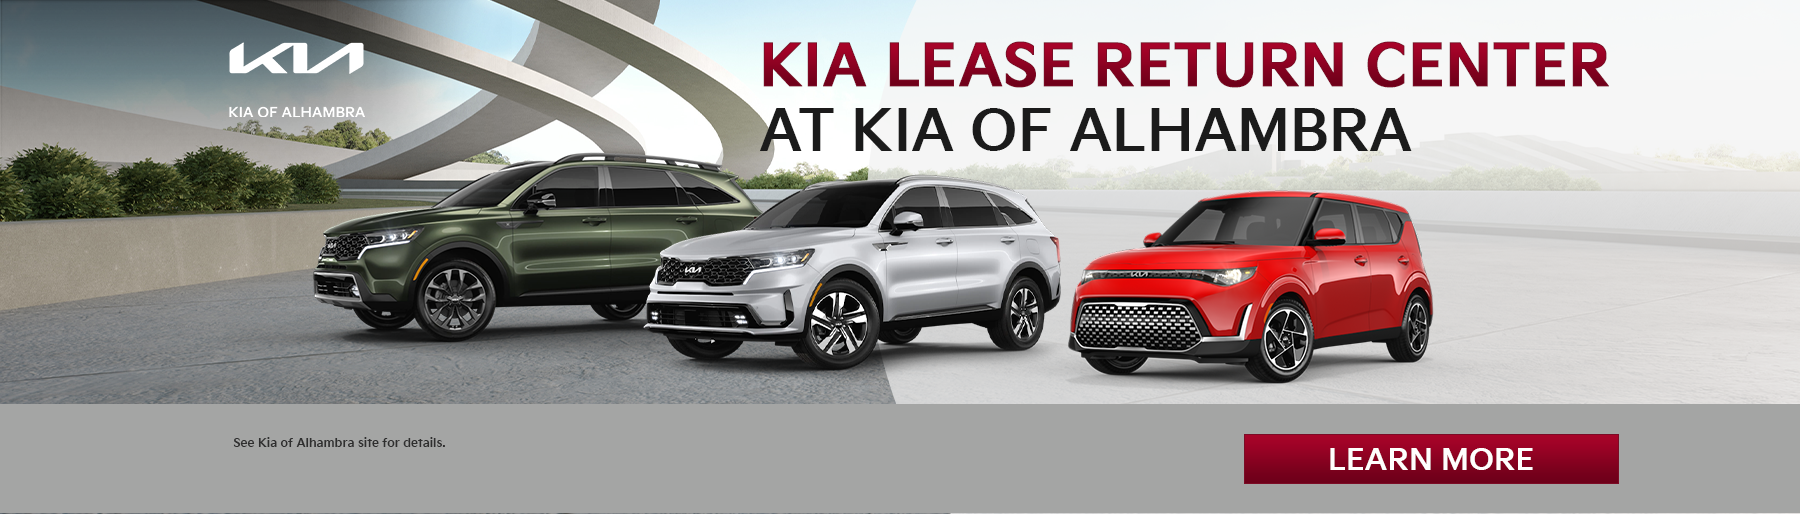 Kia of Alhambra Lease Return Manager Special